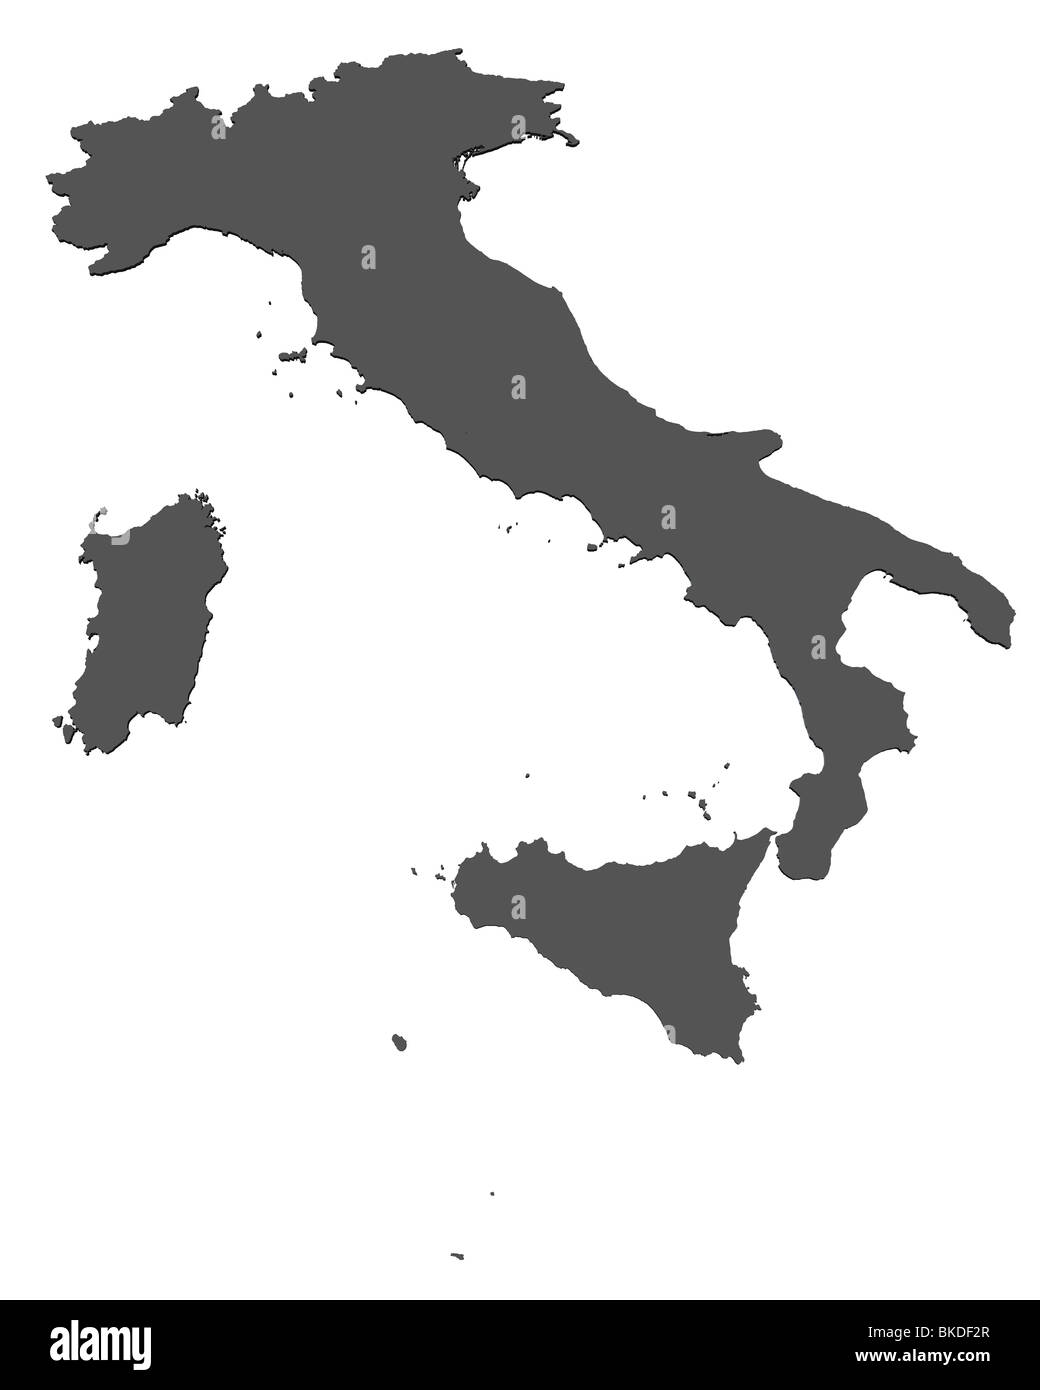 3d rendered blank map of Italy without shadow Stock Photo